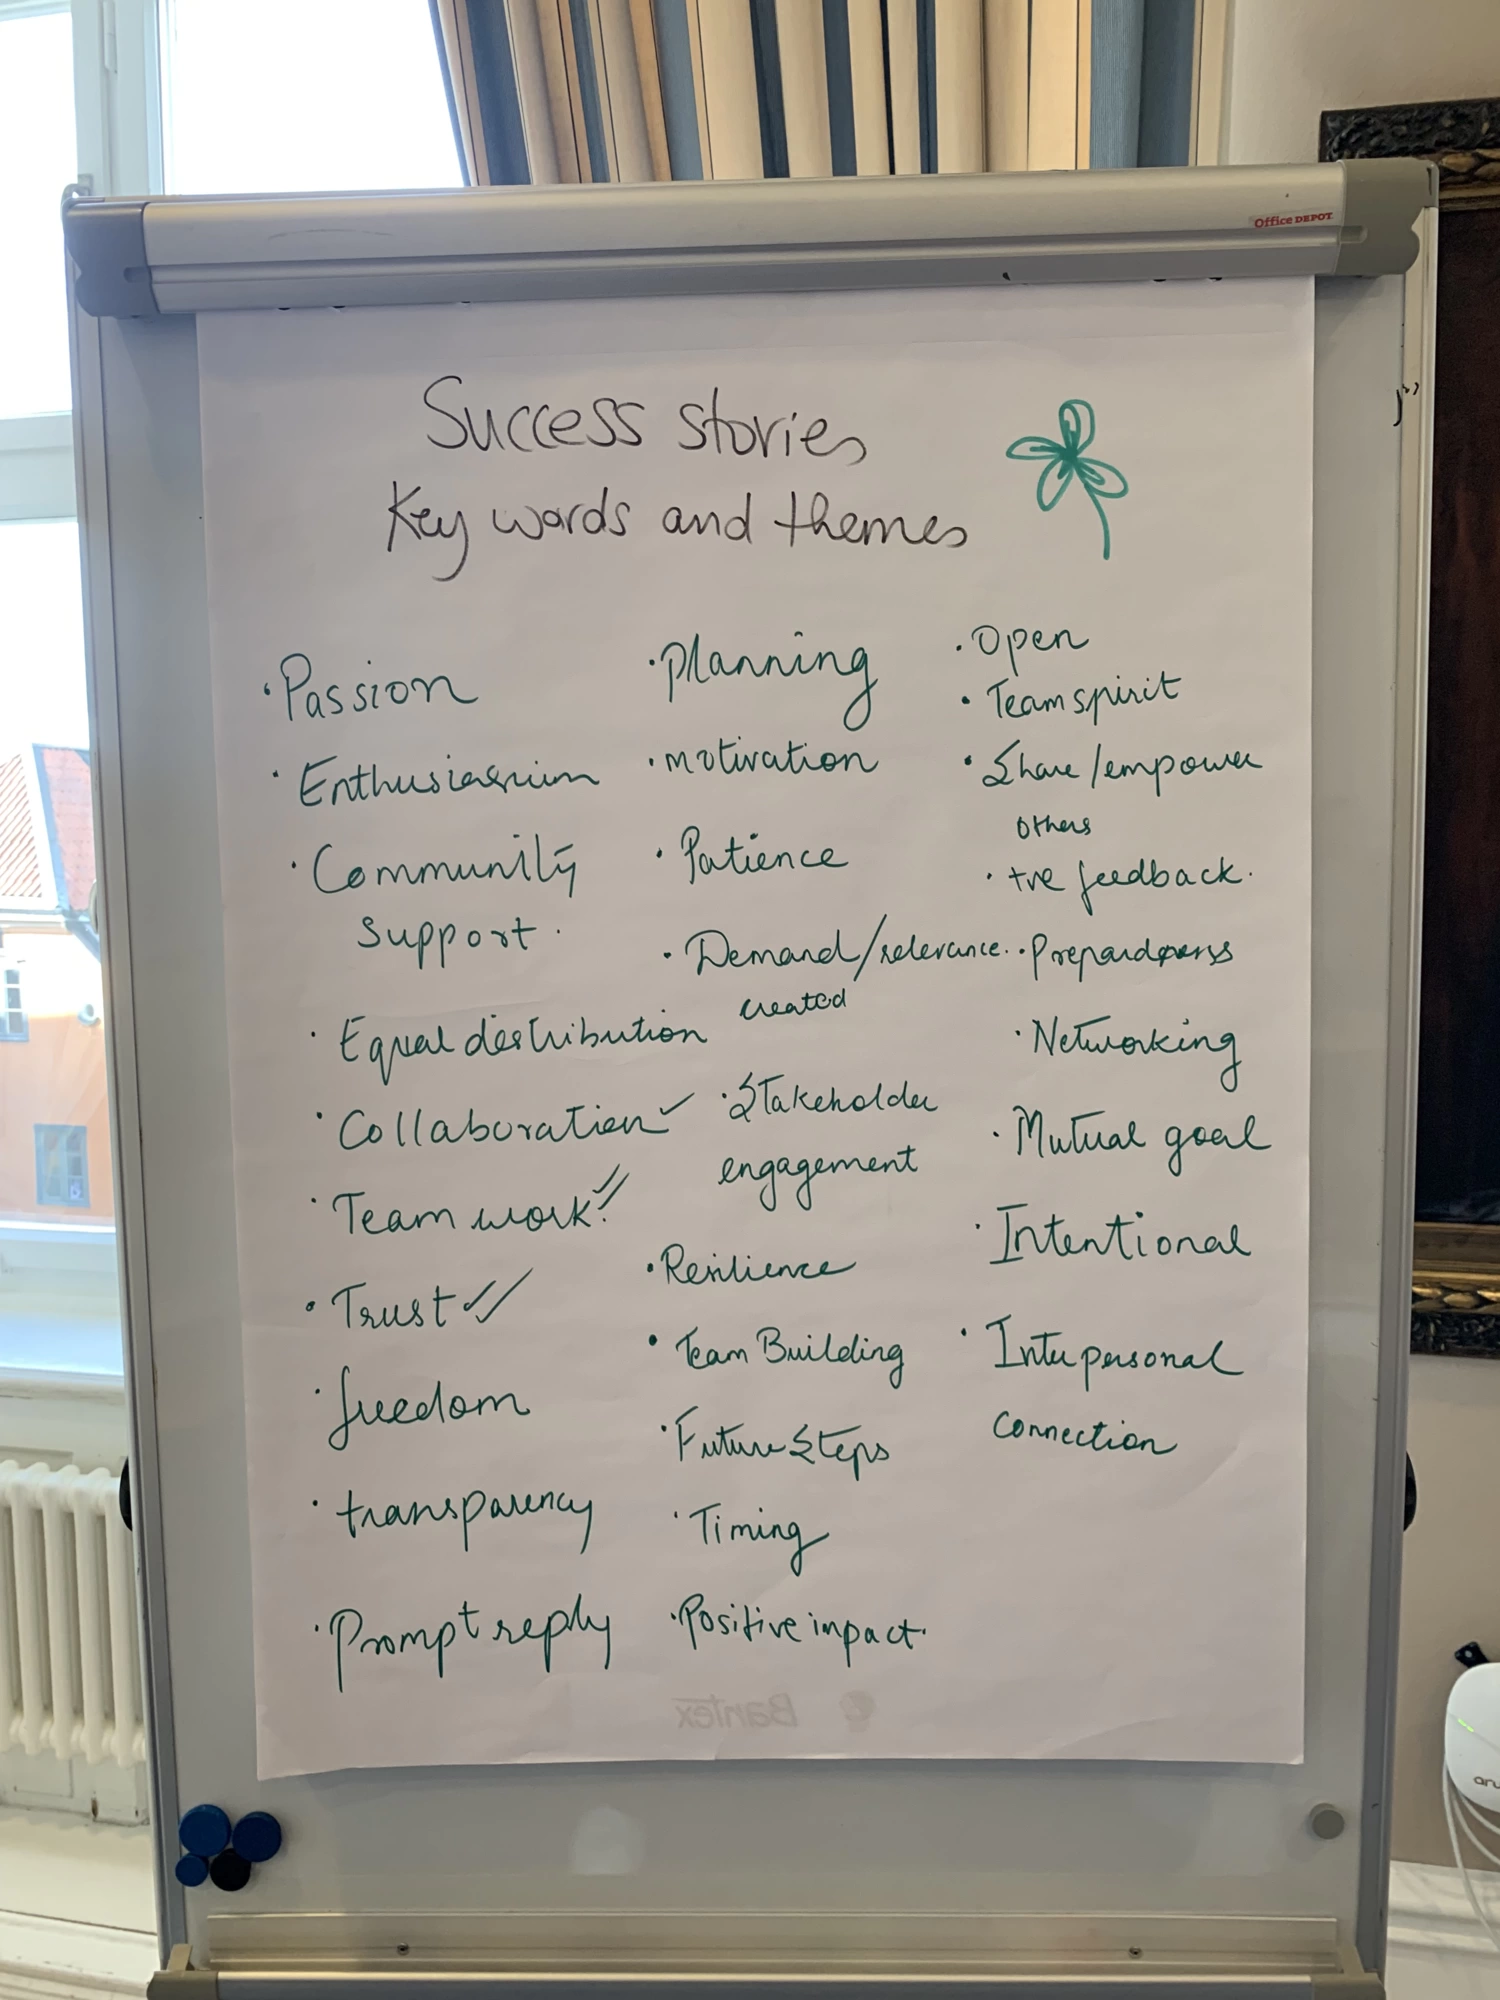 Key words and themes from success stories.